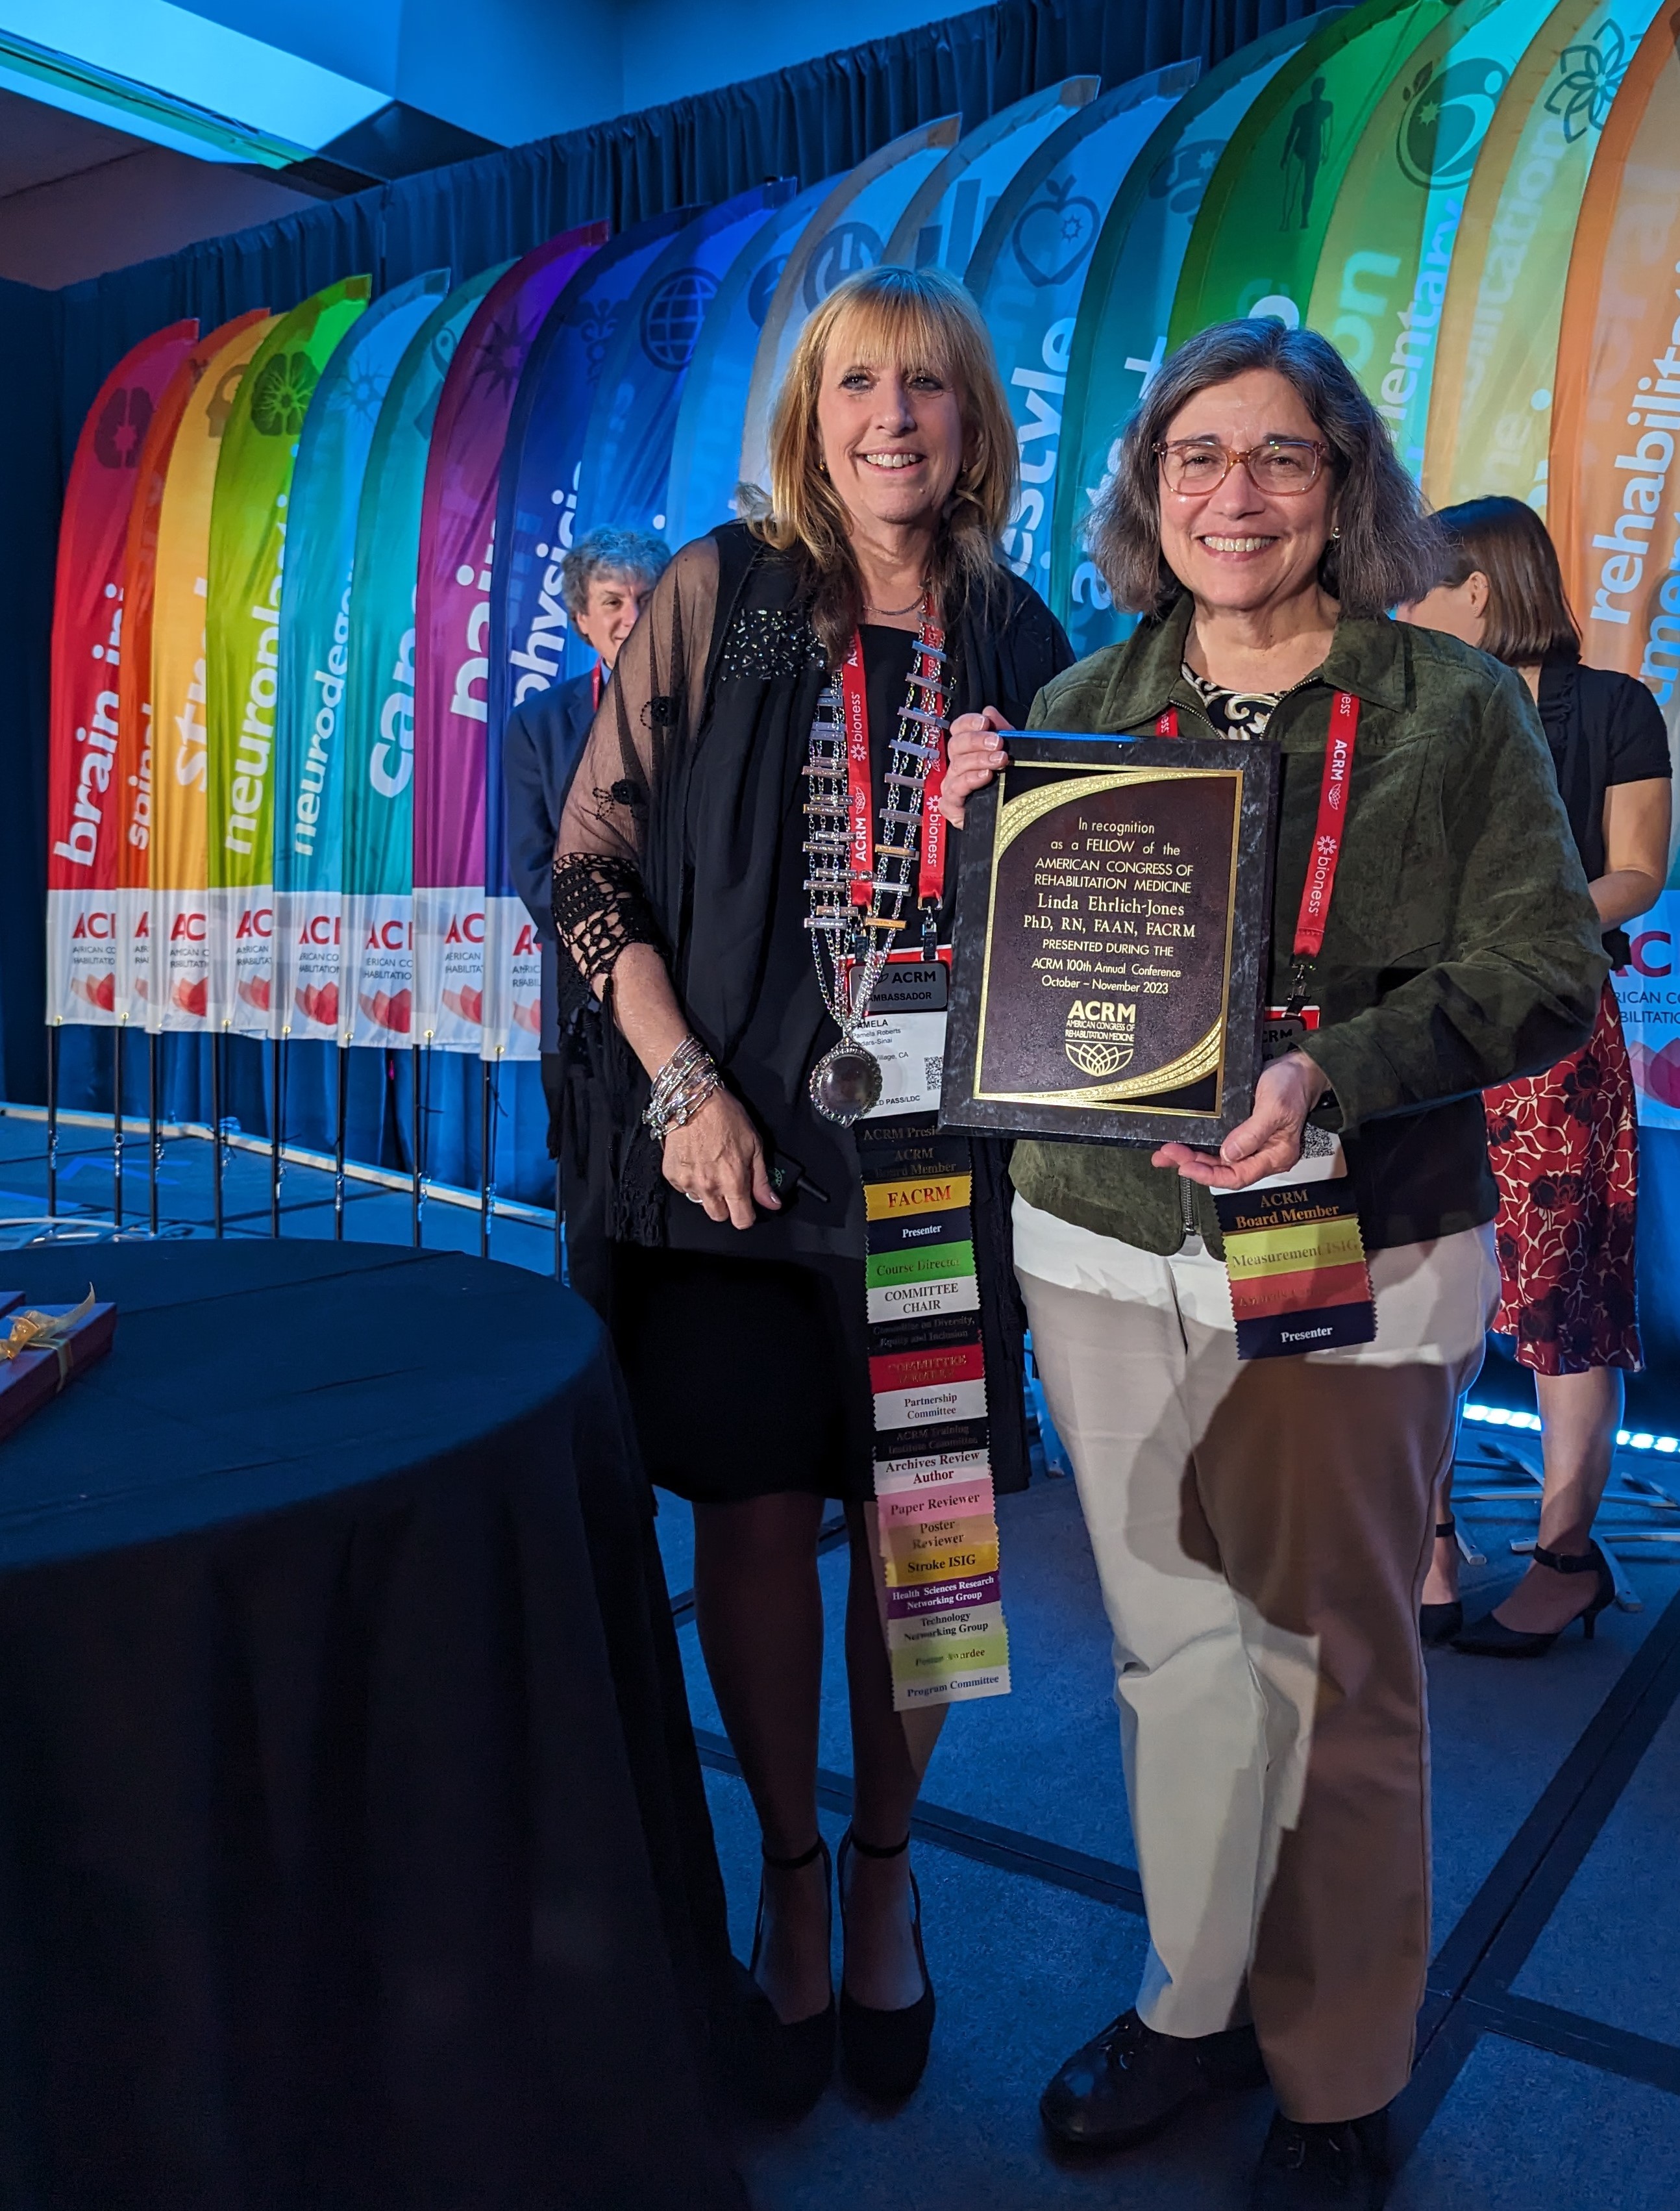 a blonde woman with a black dress stands next to a woman with short dark hair holding a plaque. They are at the ACRM Annual Conference.